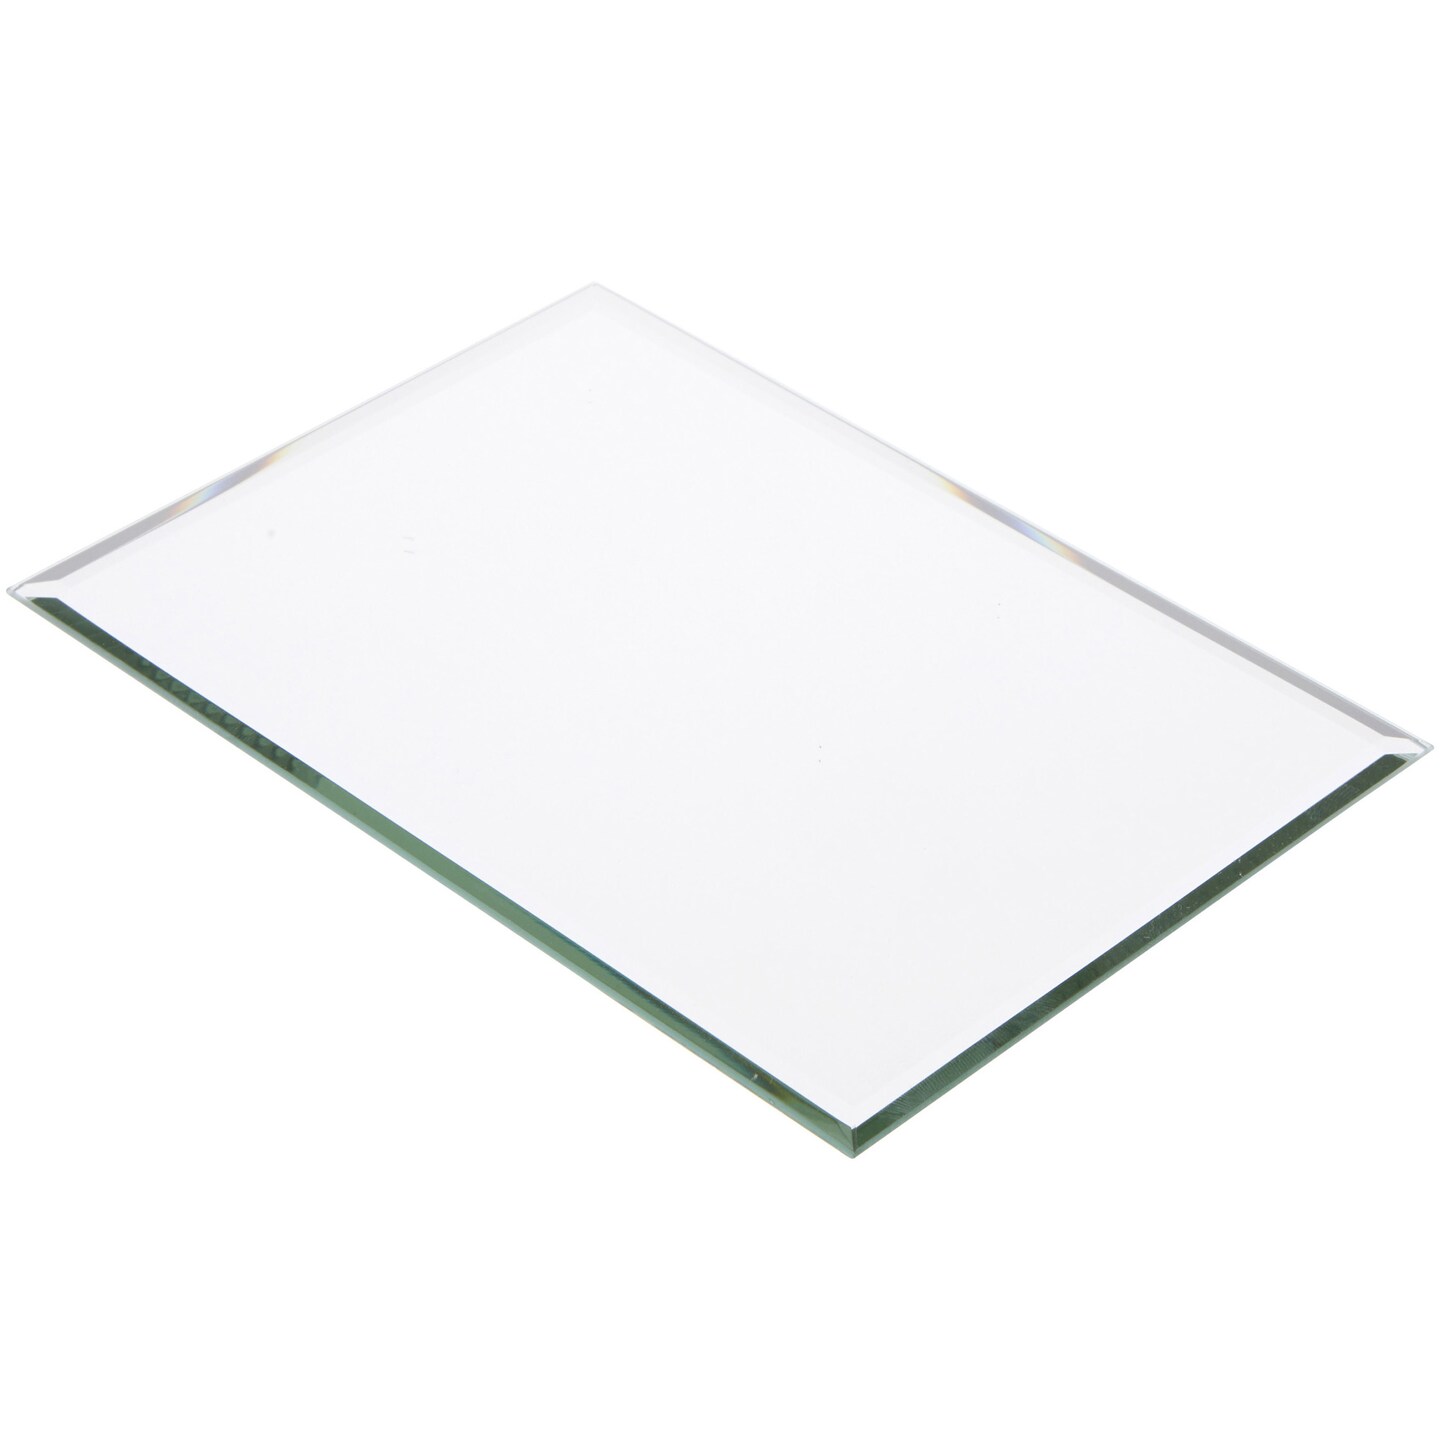 Unbreakable Mirrors Unbreakable Mirrors; 2.5 x 3 in.:Education Supplies